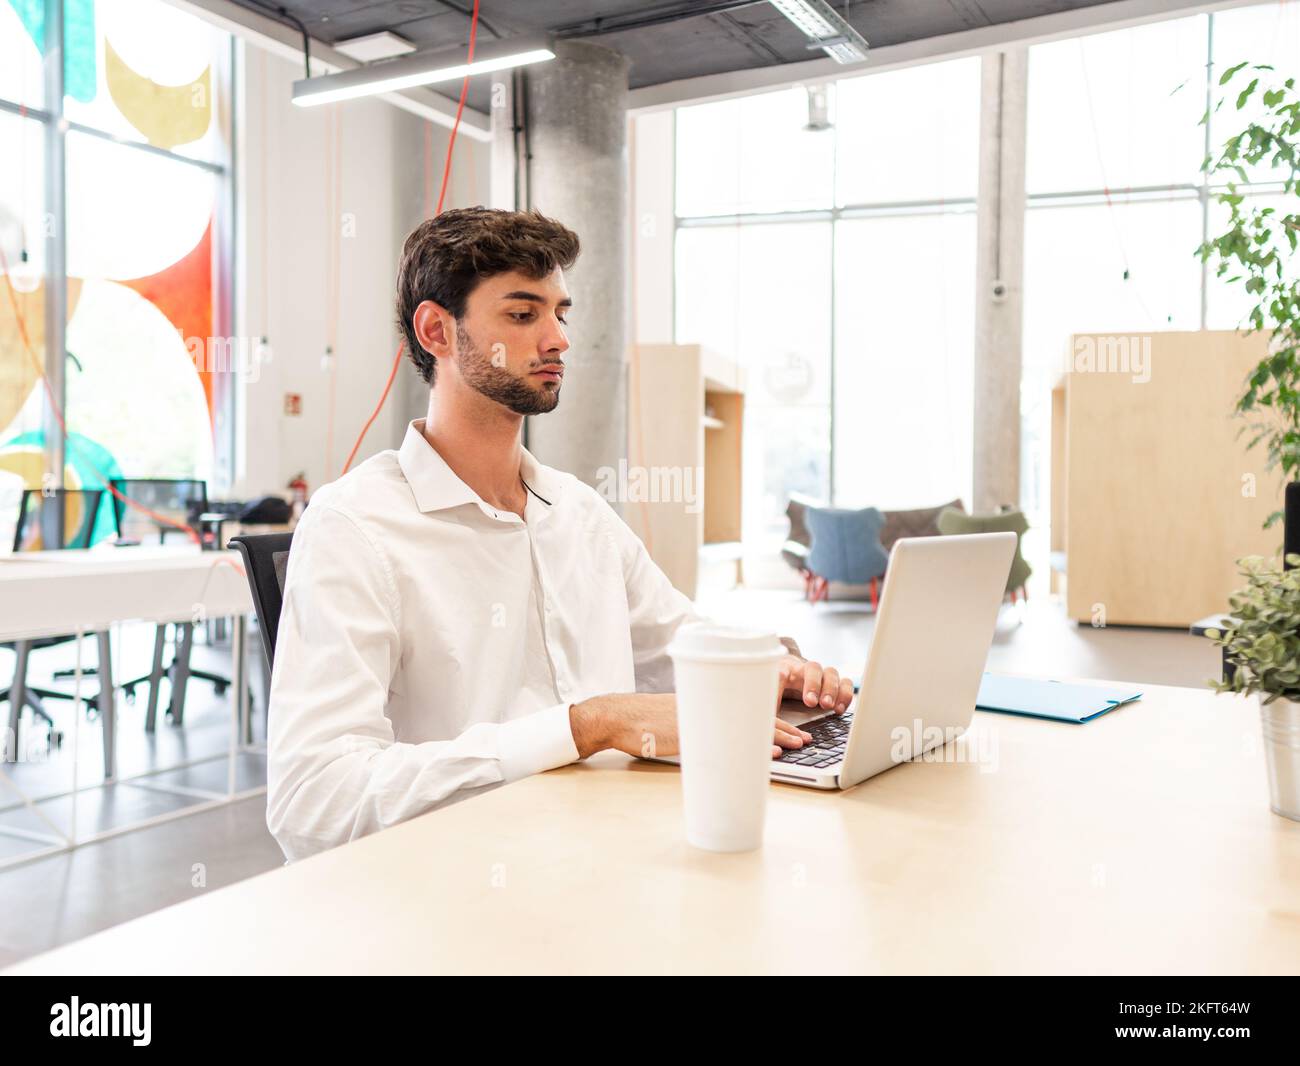 Concentrated young bearded man in white shirt sitting at table and browsing internet via laptop while working on laptop in spacious office cafeteria Stock Photo